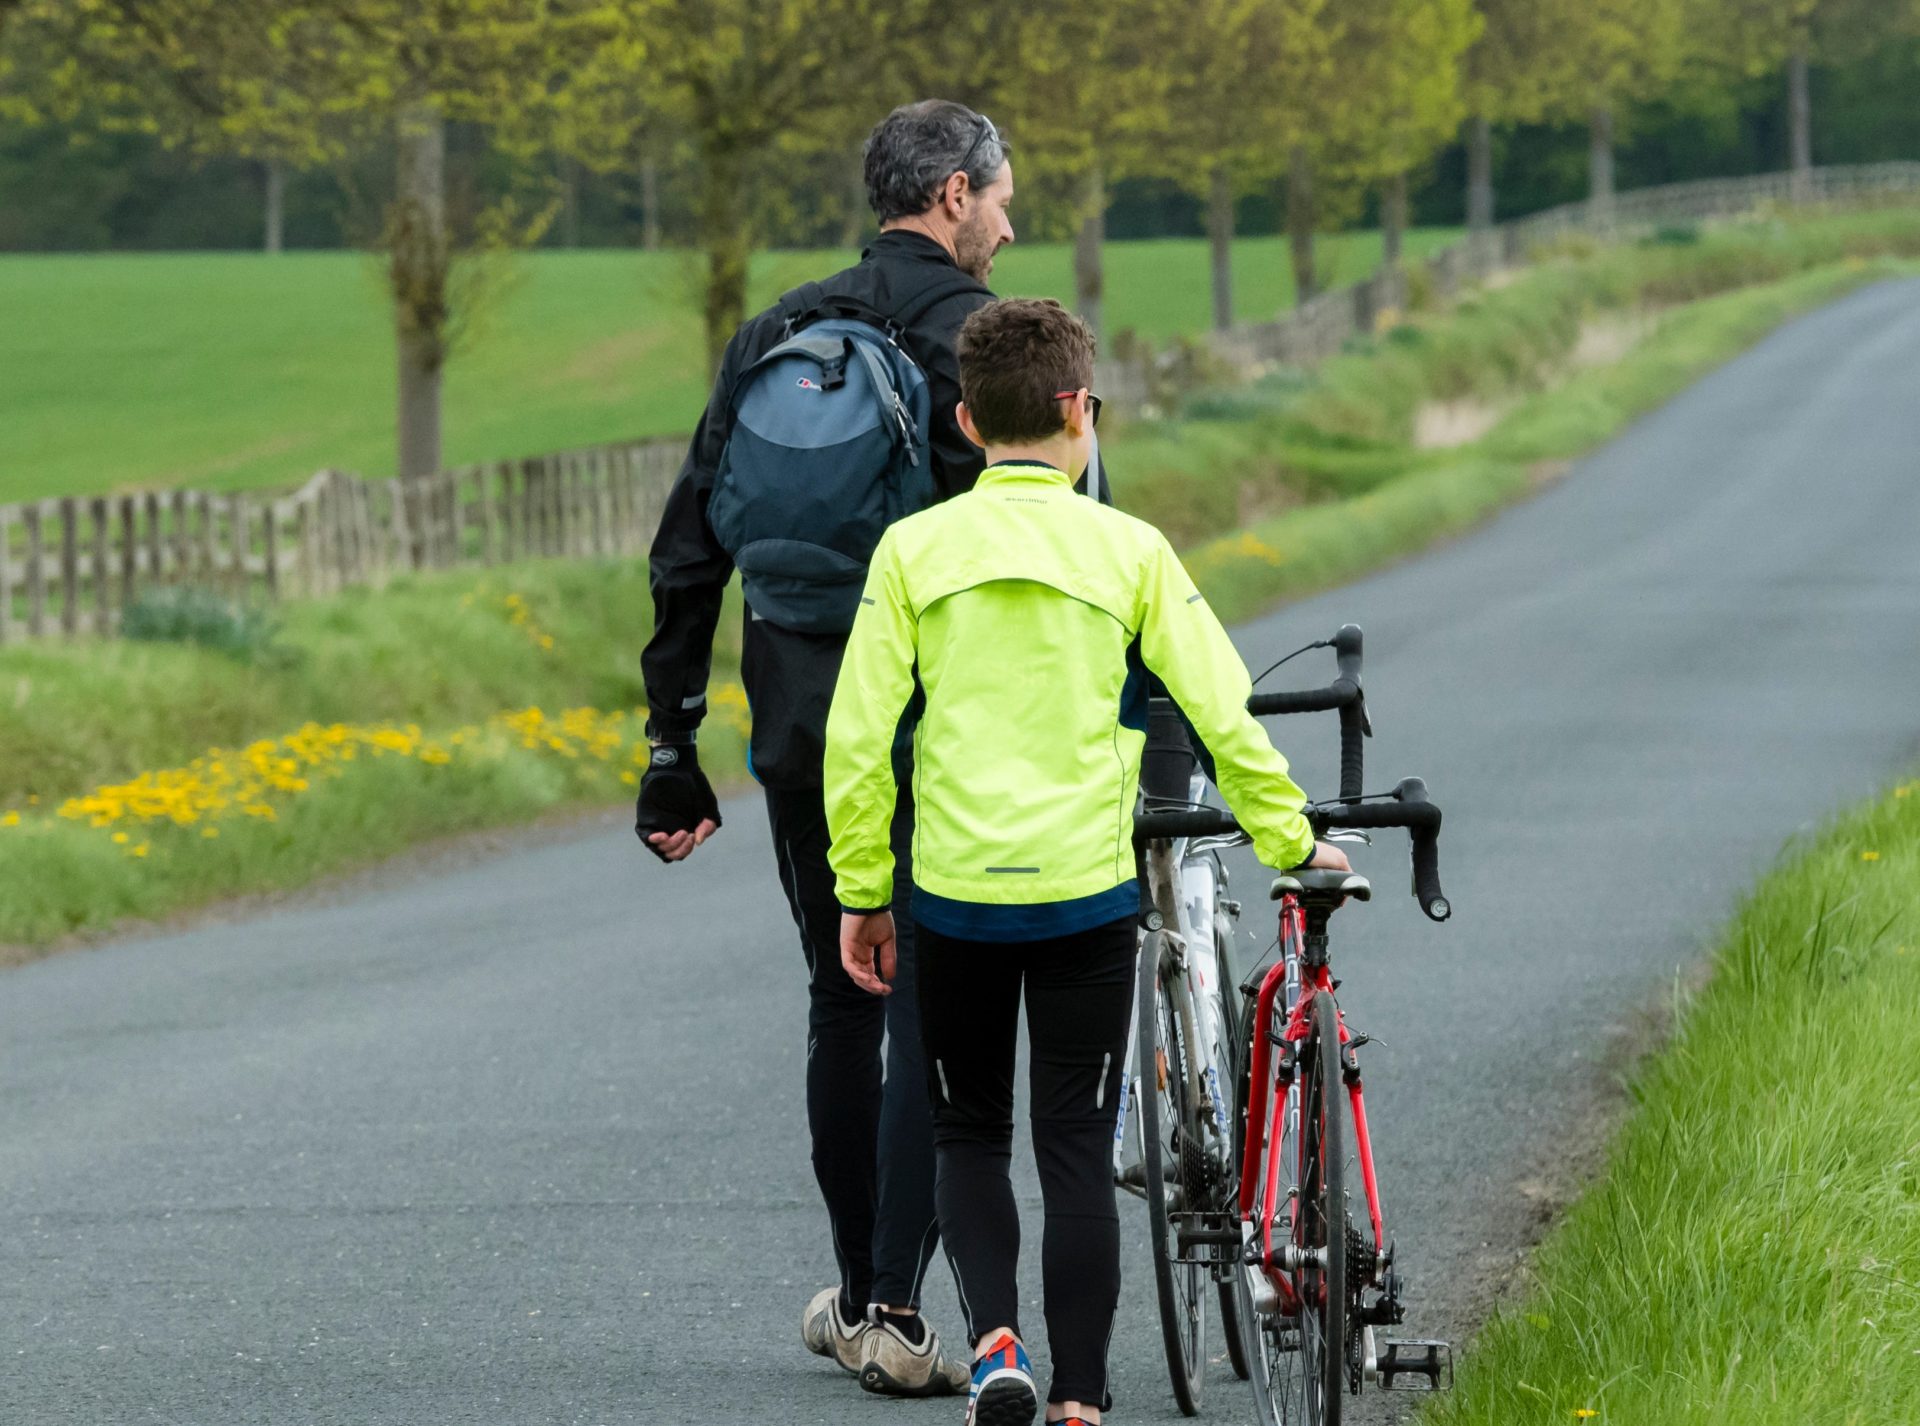 A father and son push their bikes along a scenic country lane